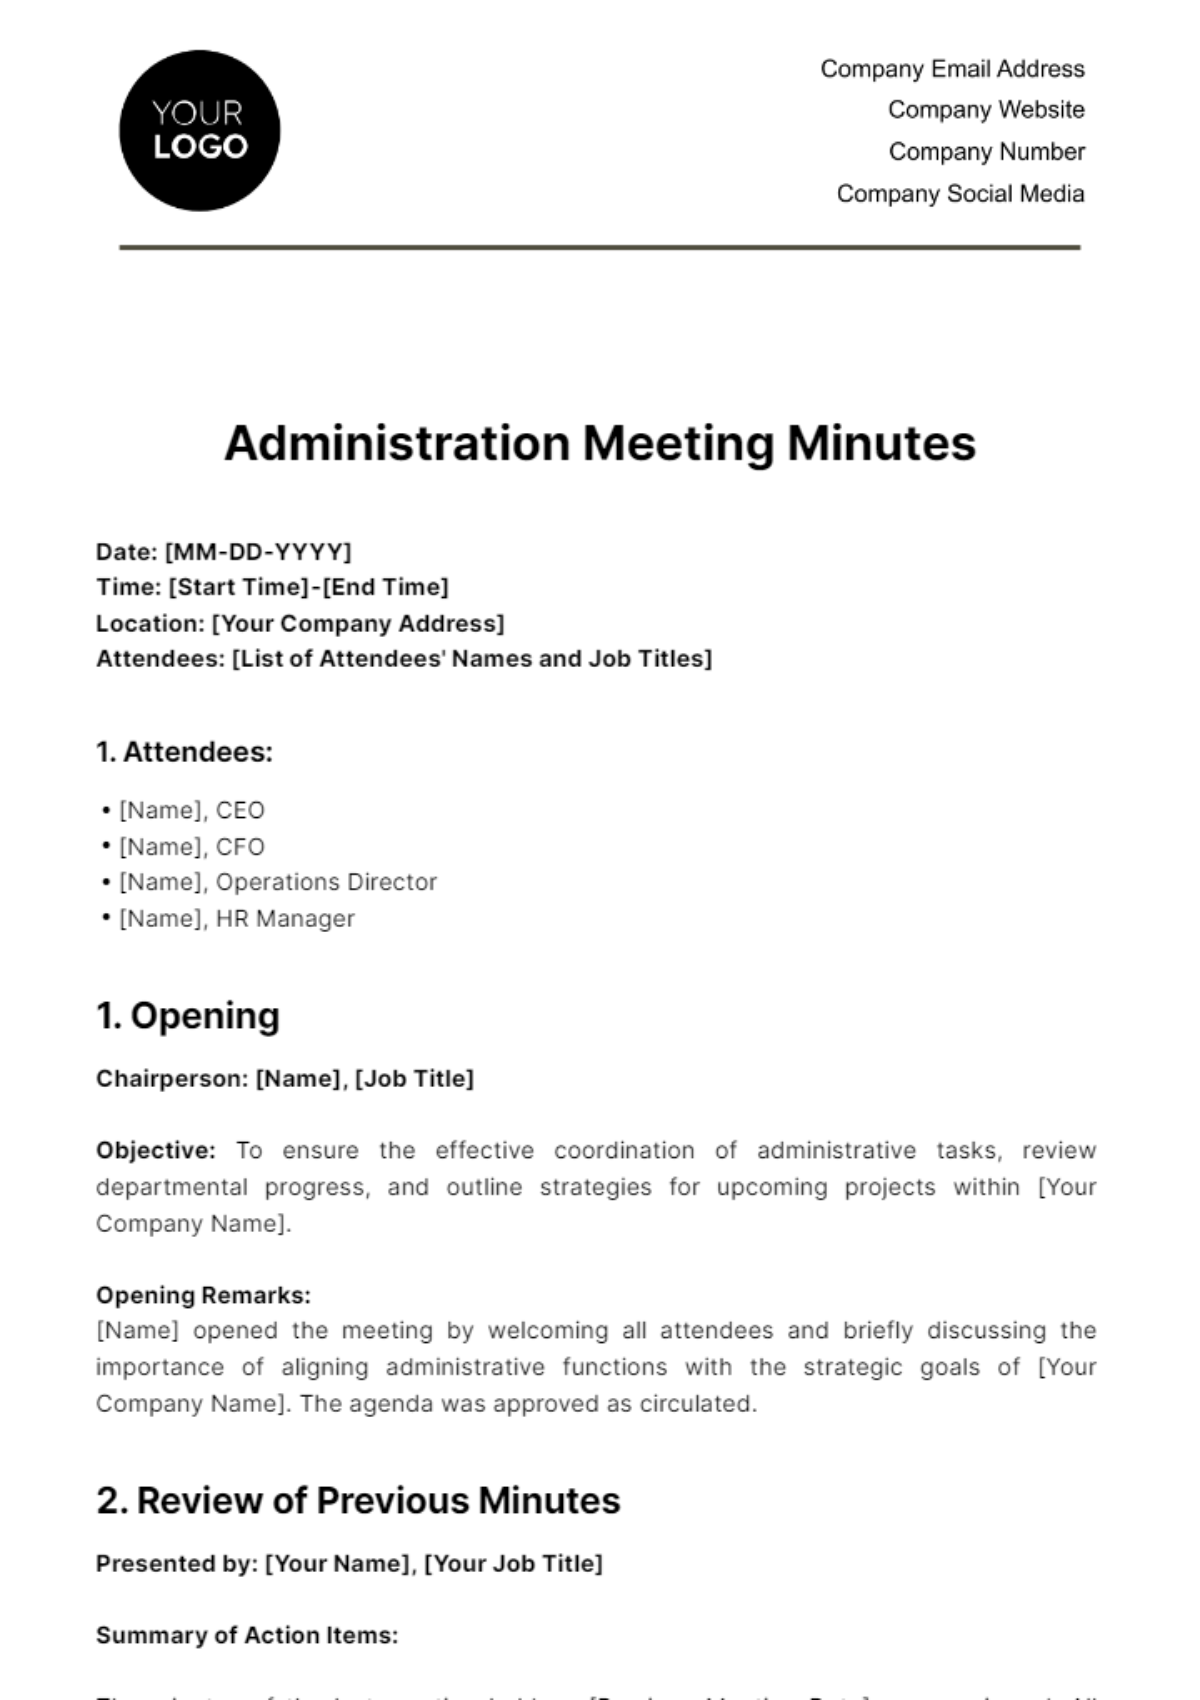 Administration Meeting Minutes Template